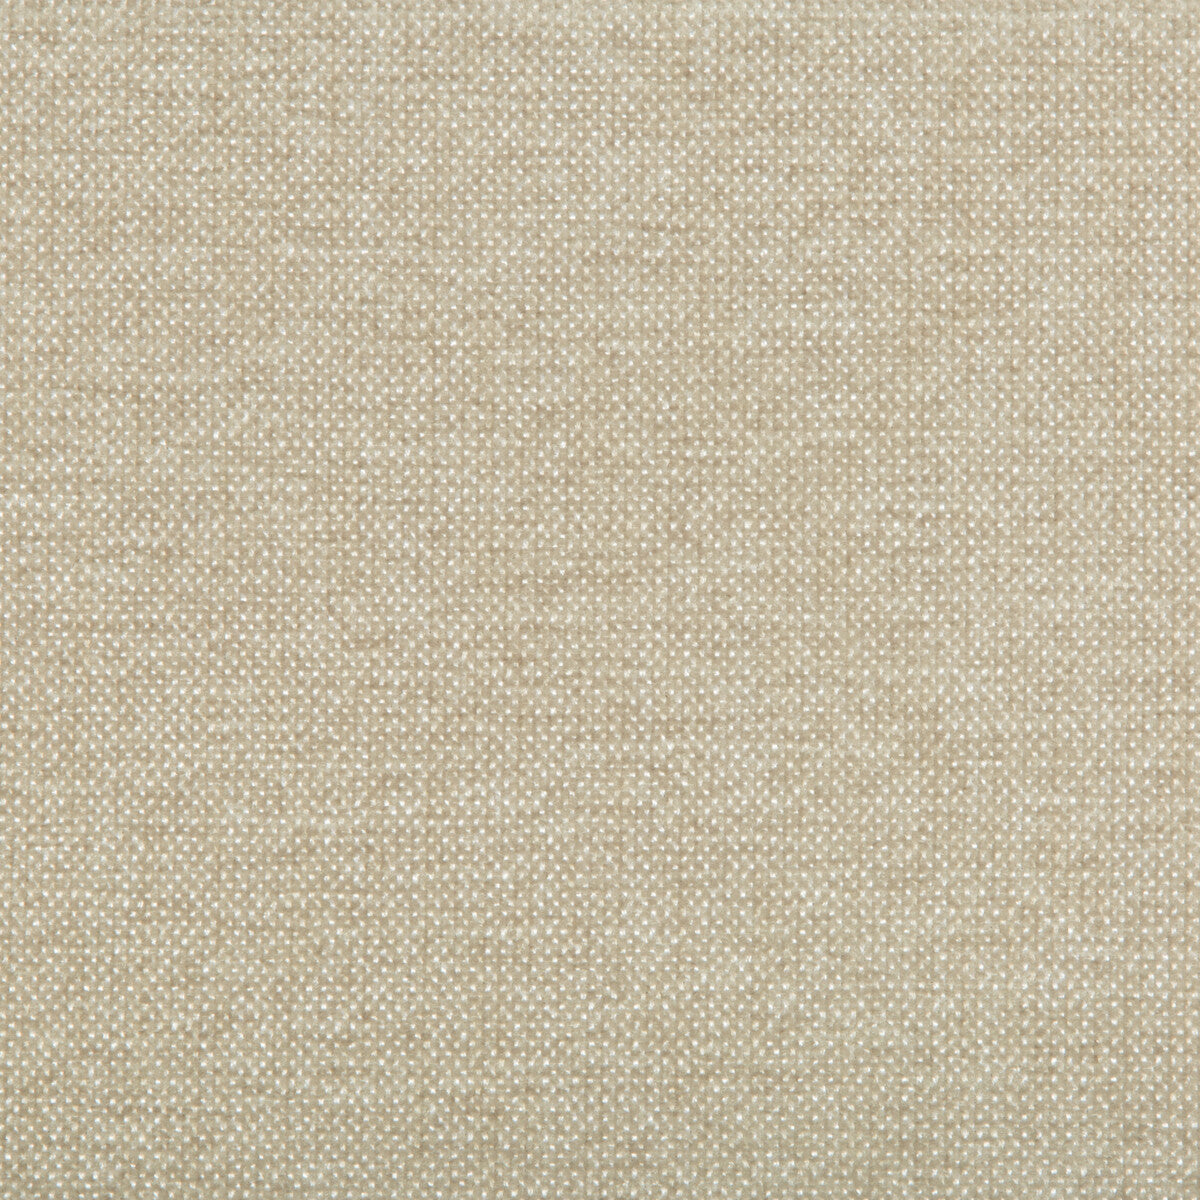 Kravet Contract fabric in 35407-116 color - pattern 35407.116.0 - by Kravet Contract in the Crypton Incase collection